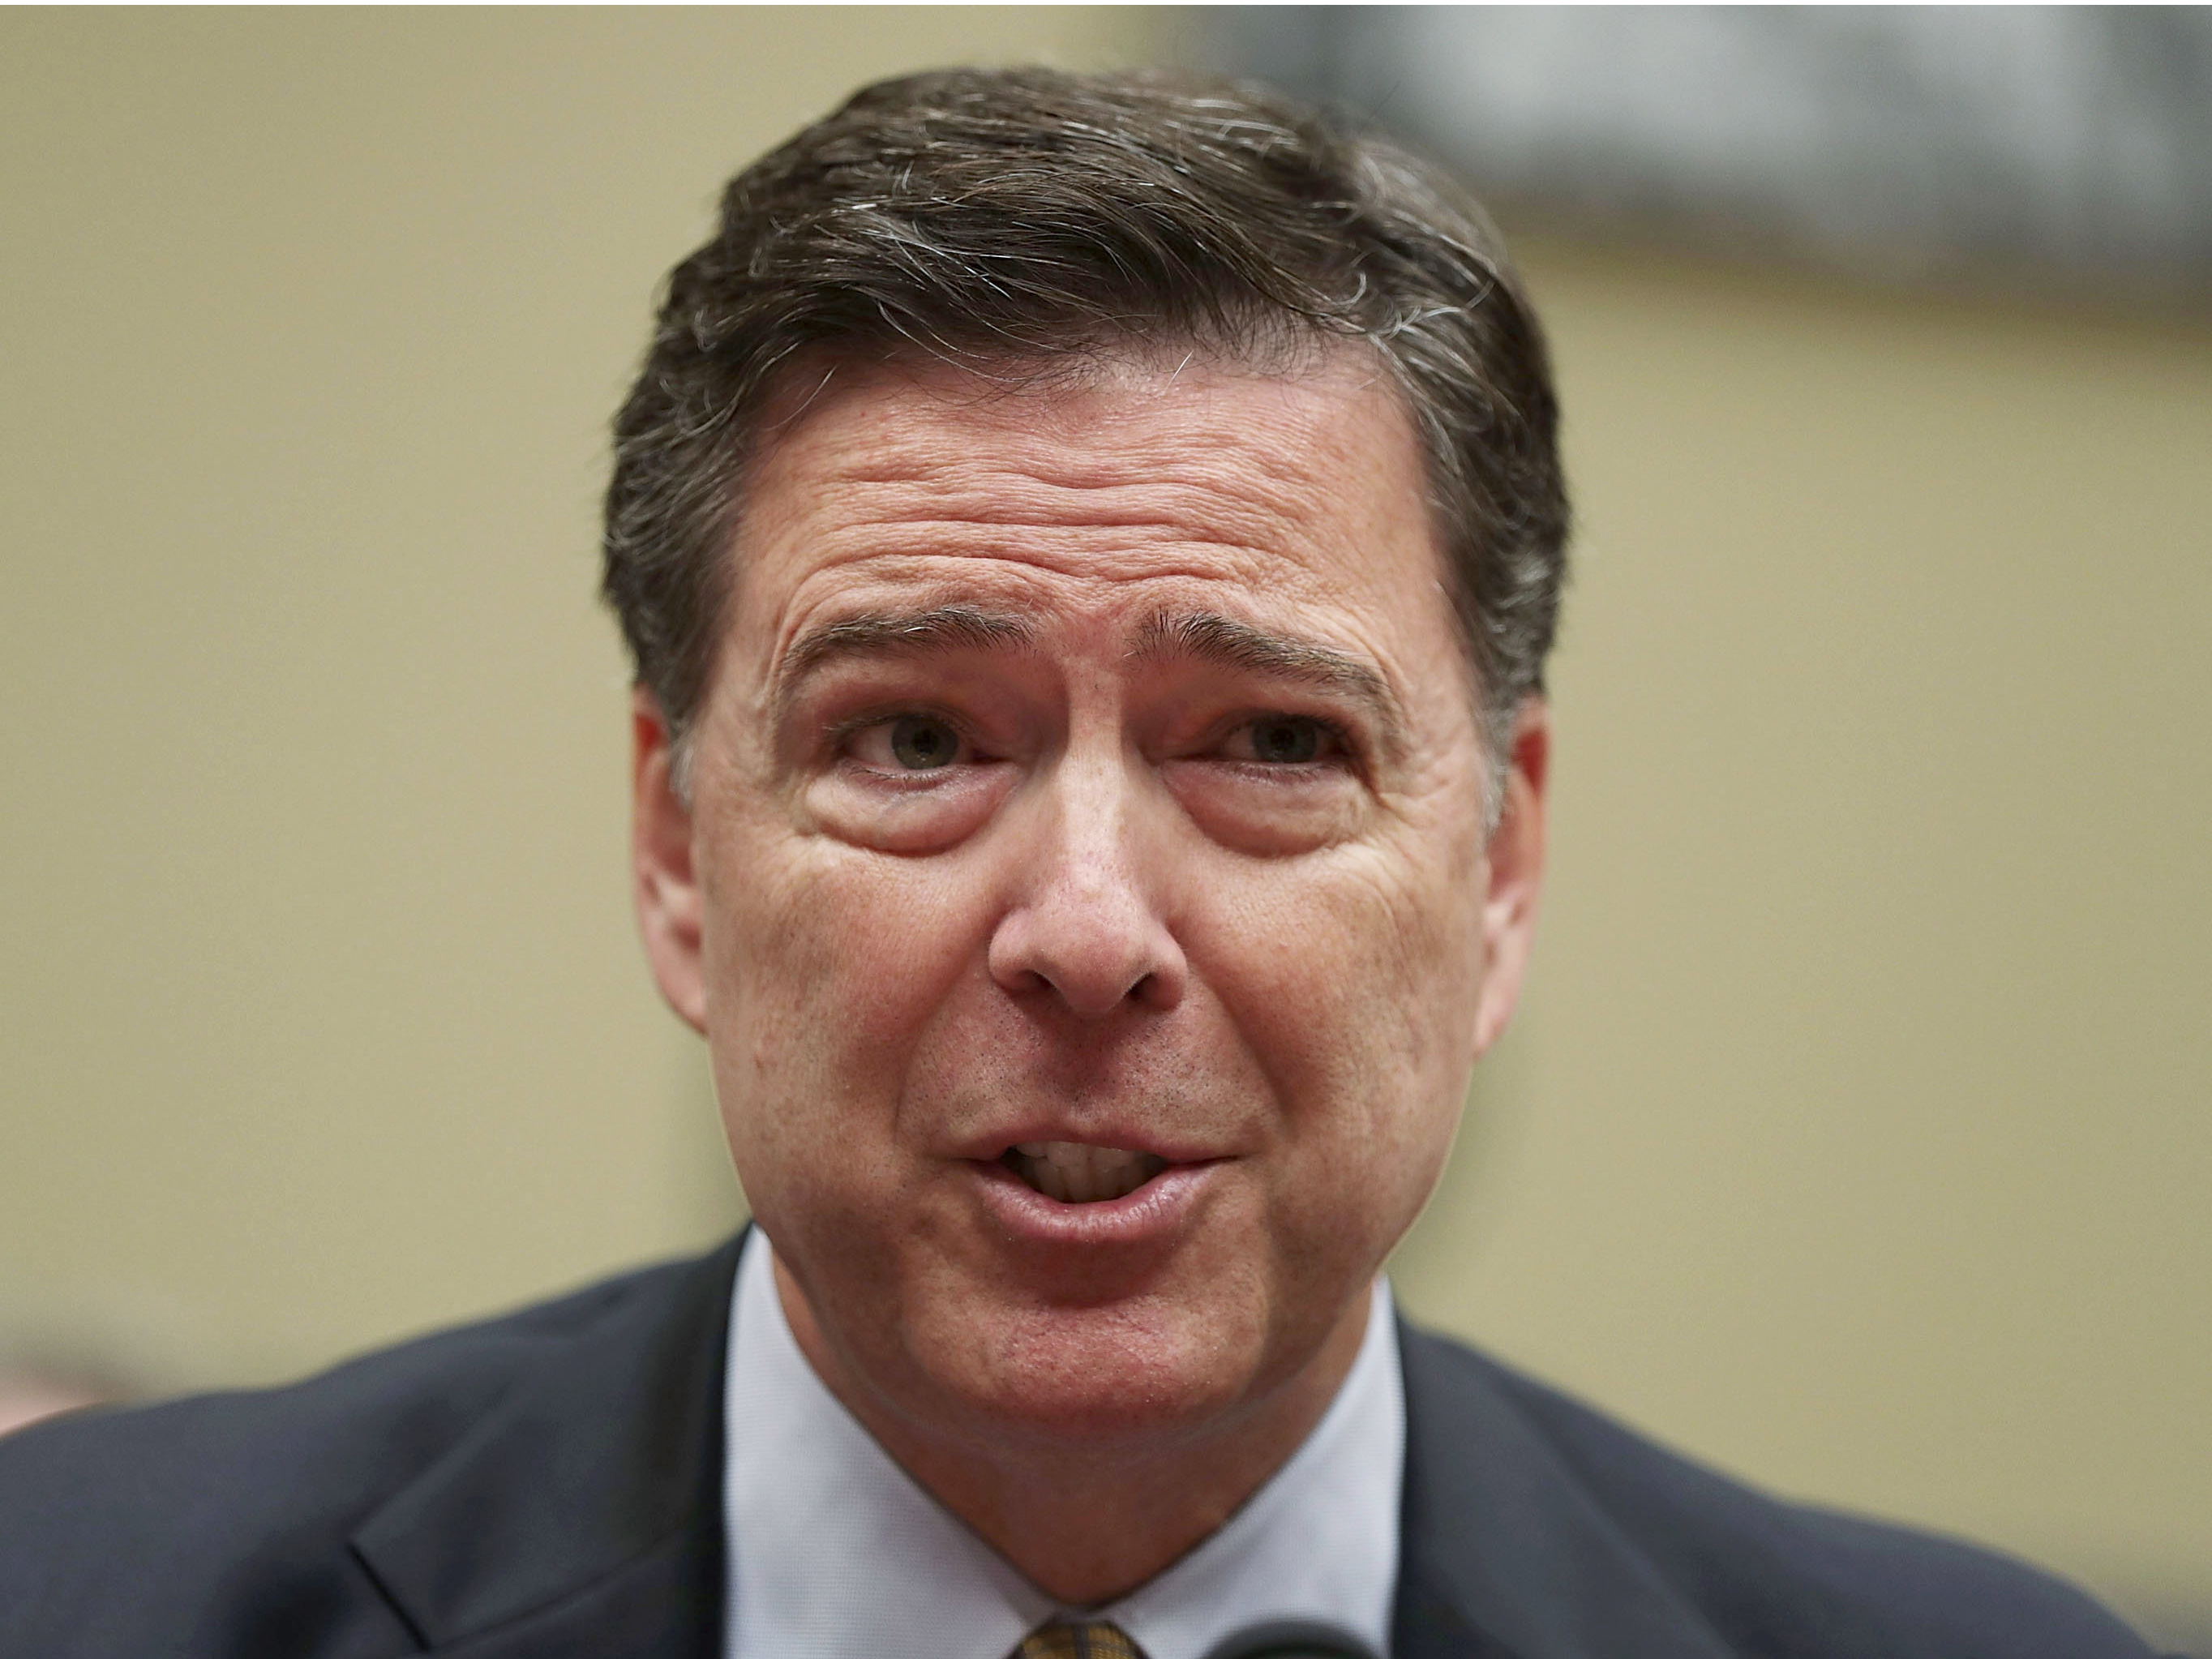 Democrats let FBI Director James Comey have it during tense closed-door meeting on Russian hacking - Business Insider